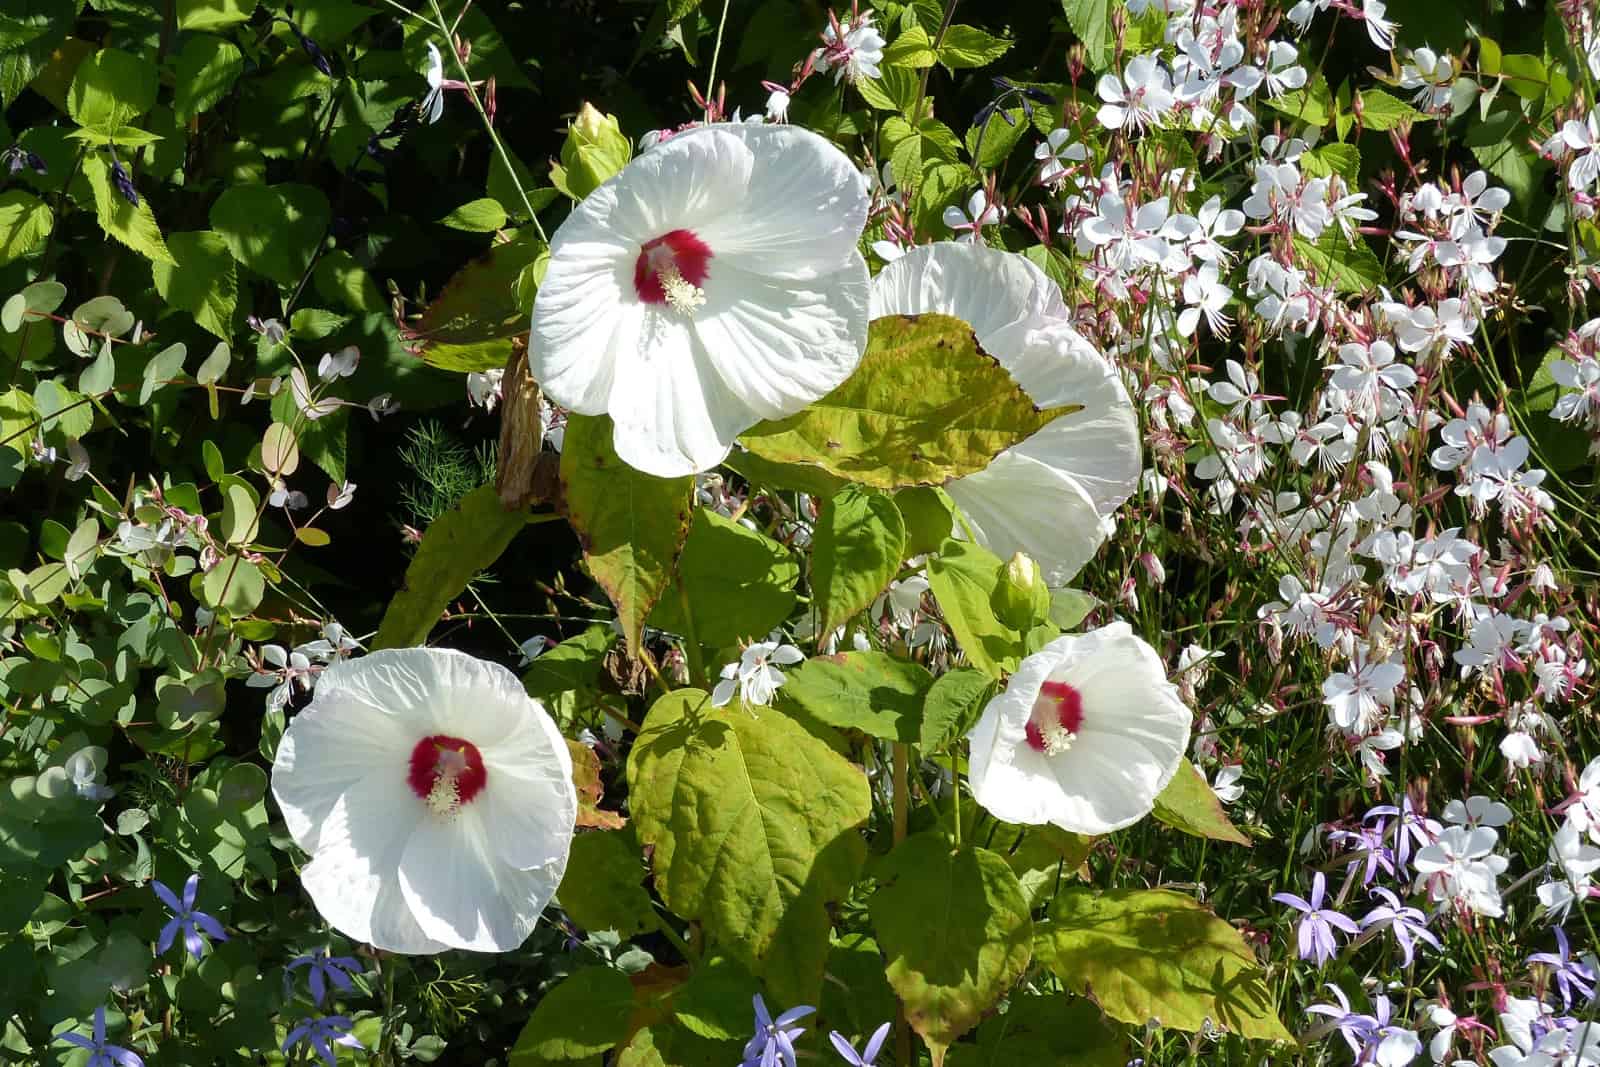 Hibiscus syriacus 'red heart' Malvaceae family